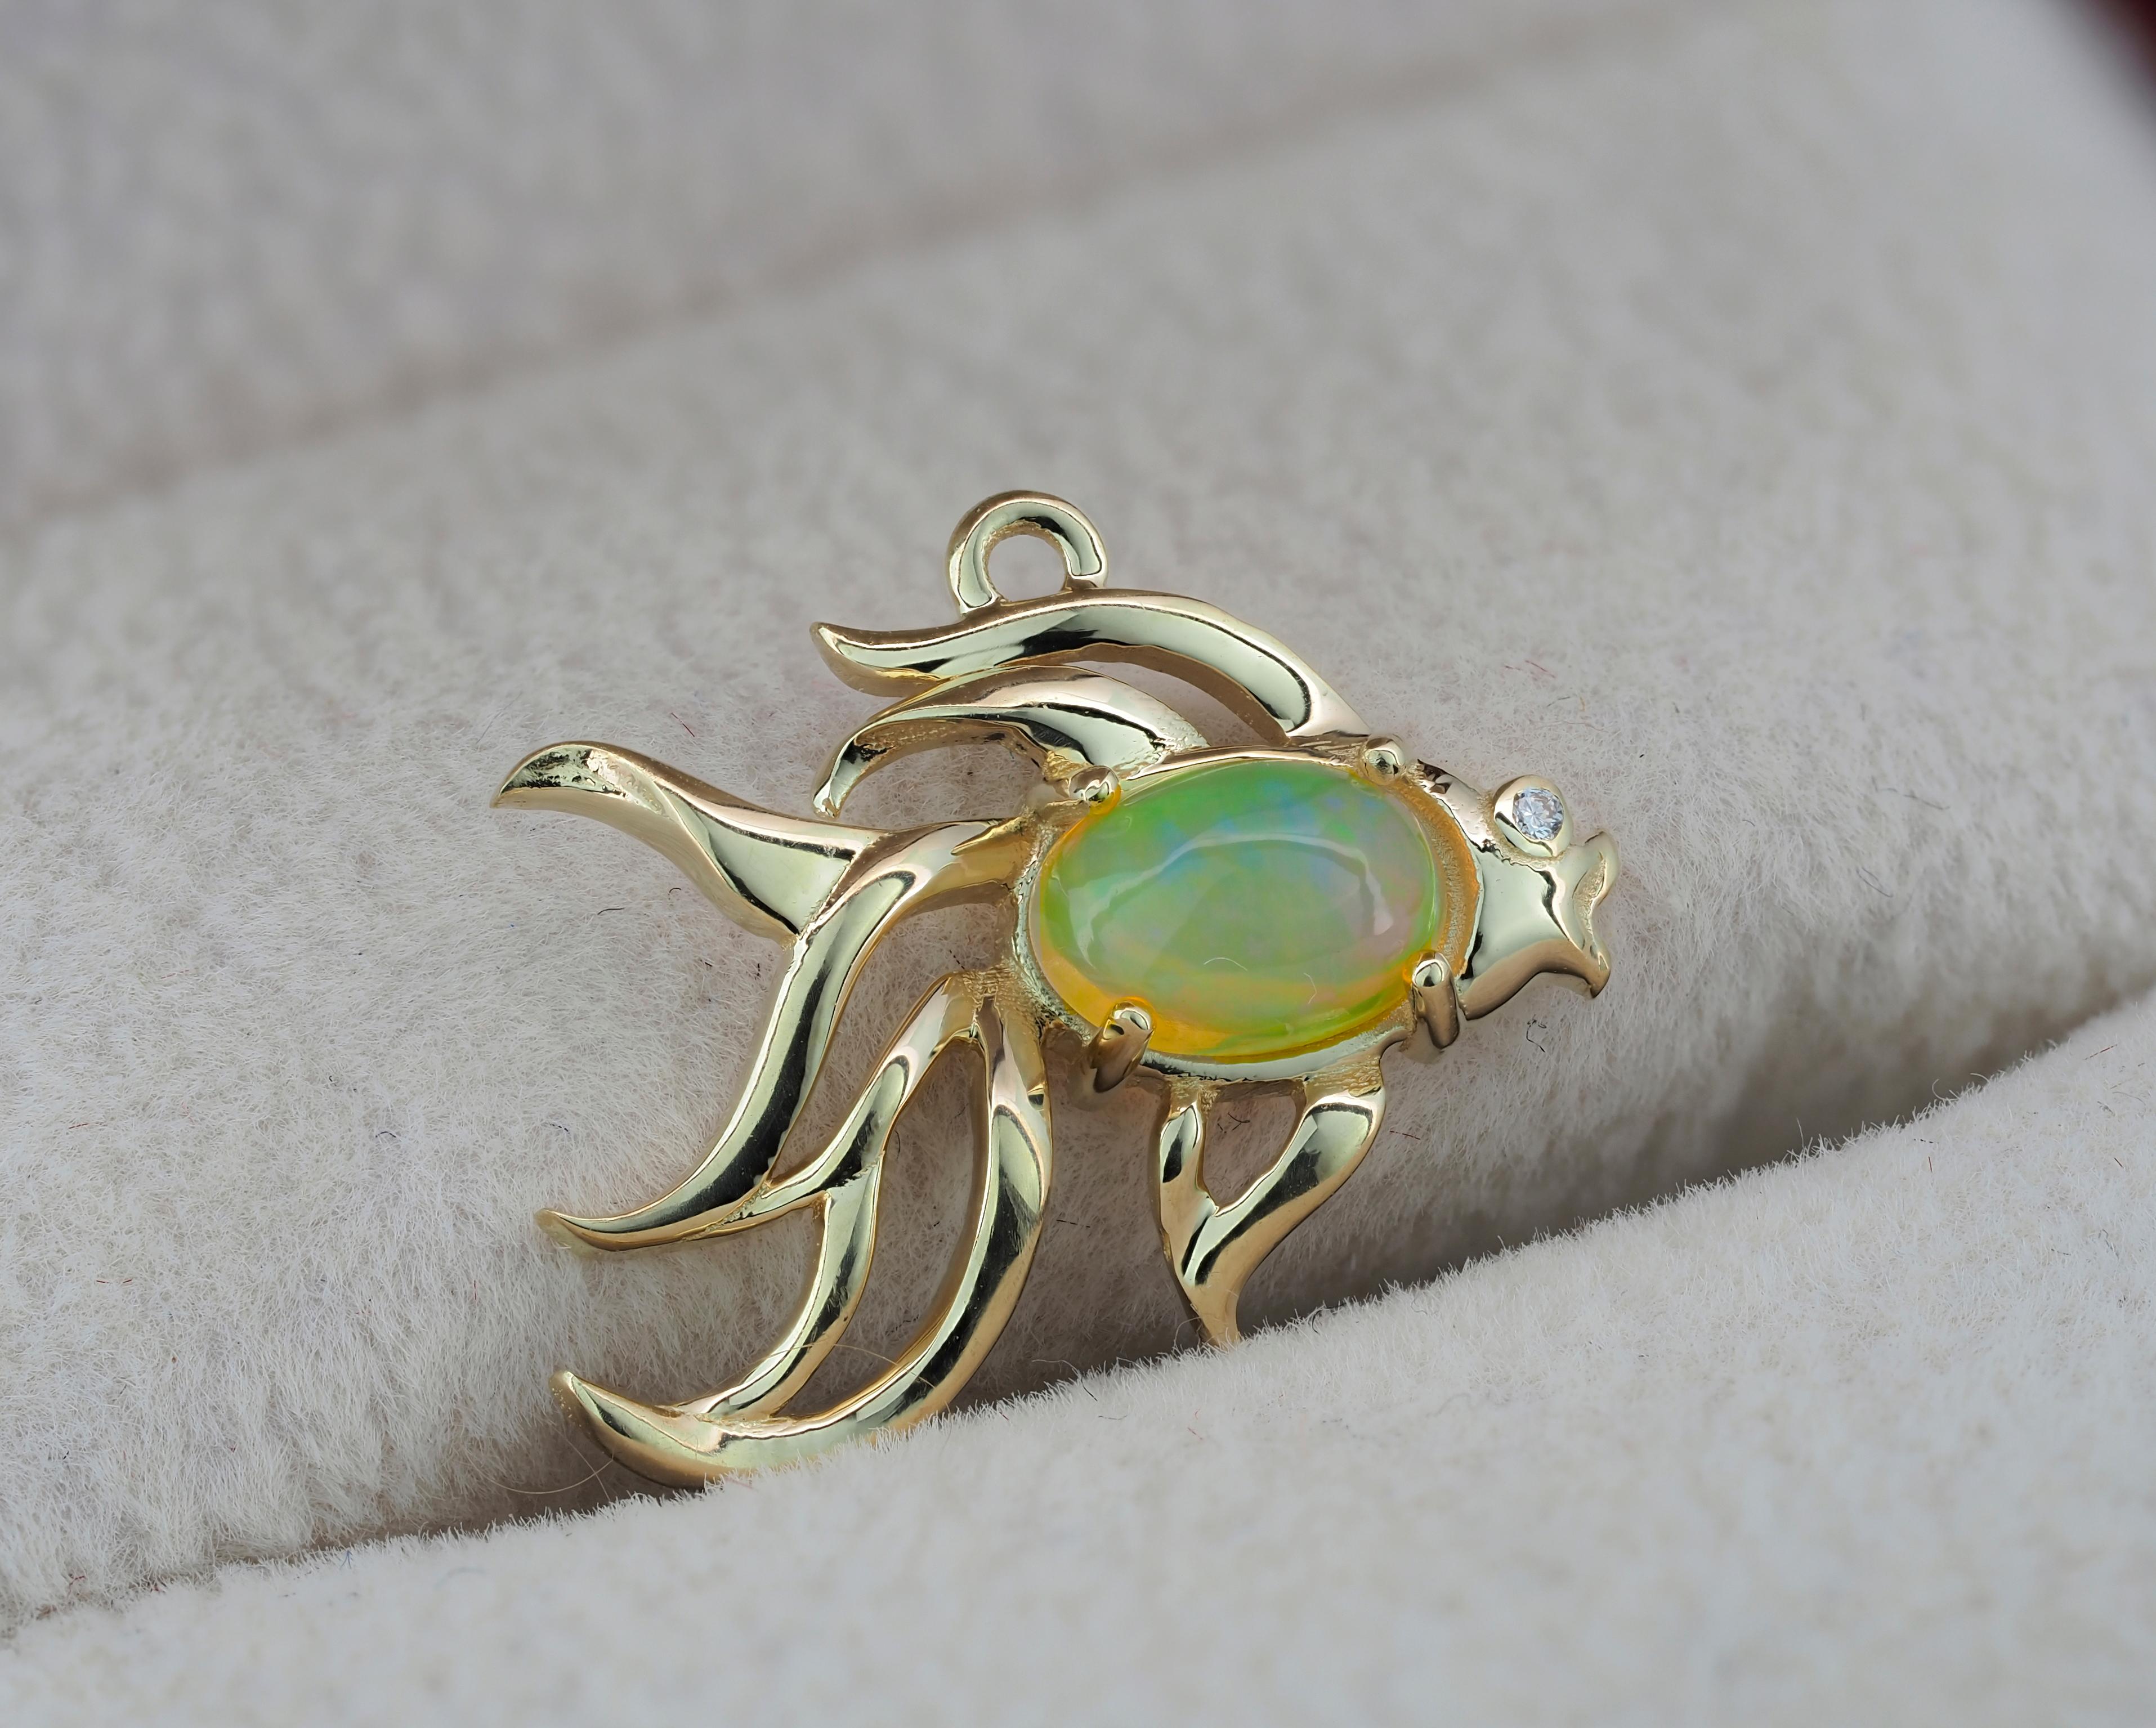 Opal Fish pendant in 14k gold. 
Fire Multicolor Ethiopian Opal gemstone pendant. October Birthstone pendant. Lucky fish charm Gift.

Metal: 14k gold
Size: 18x16mm.
Weight: 1.3 g.

Set with opal, color - multy color
Oval cabochon cut, 0.8 ct. in